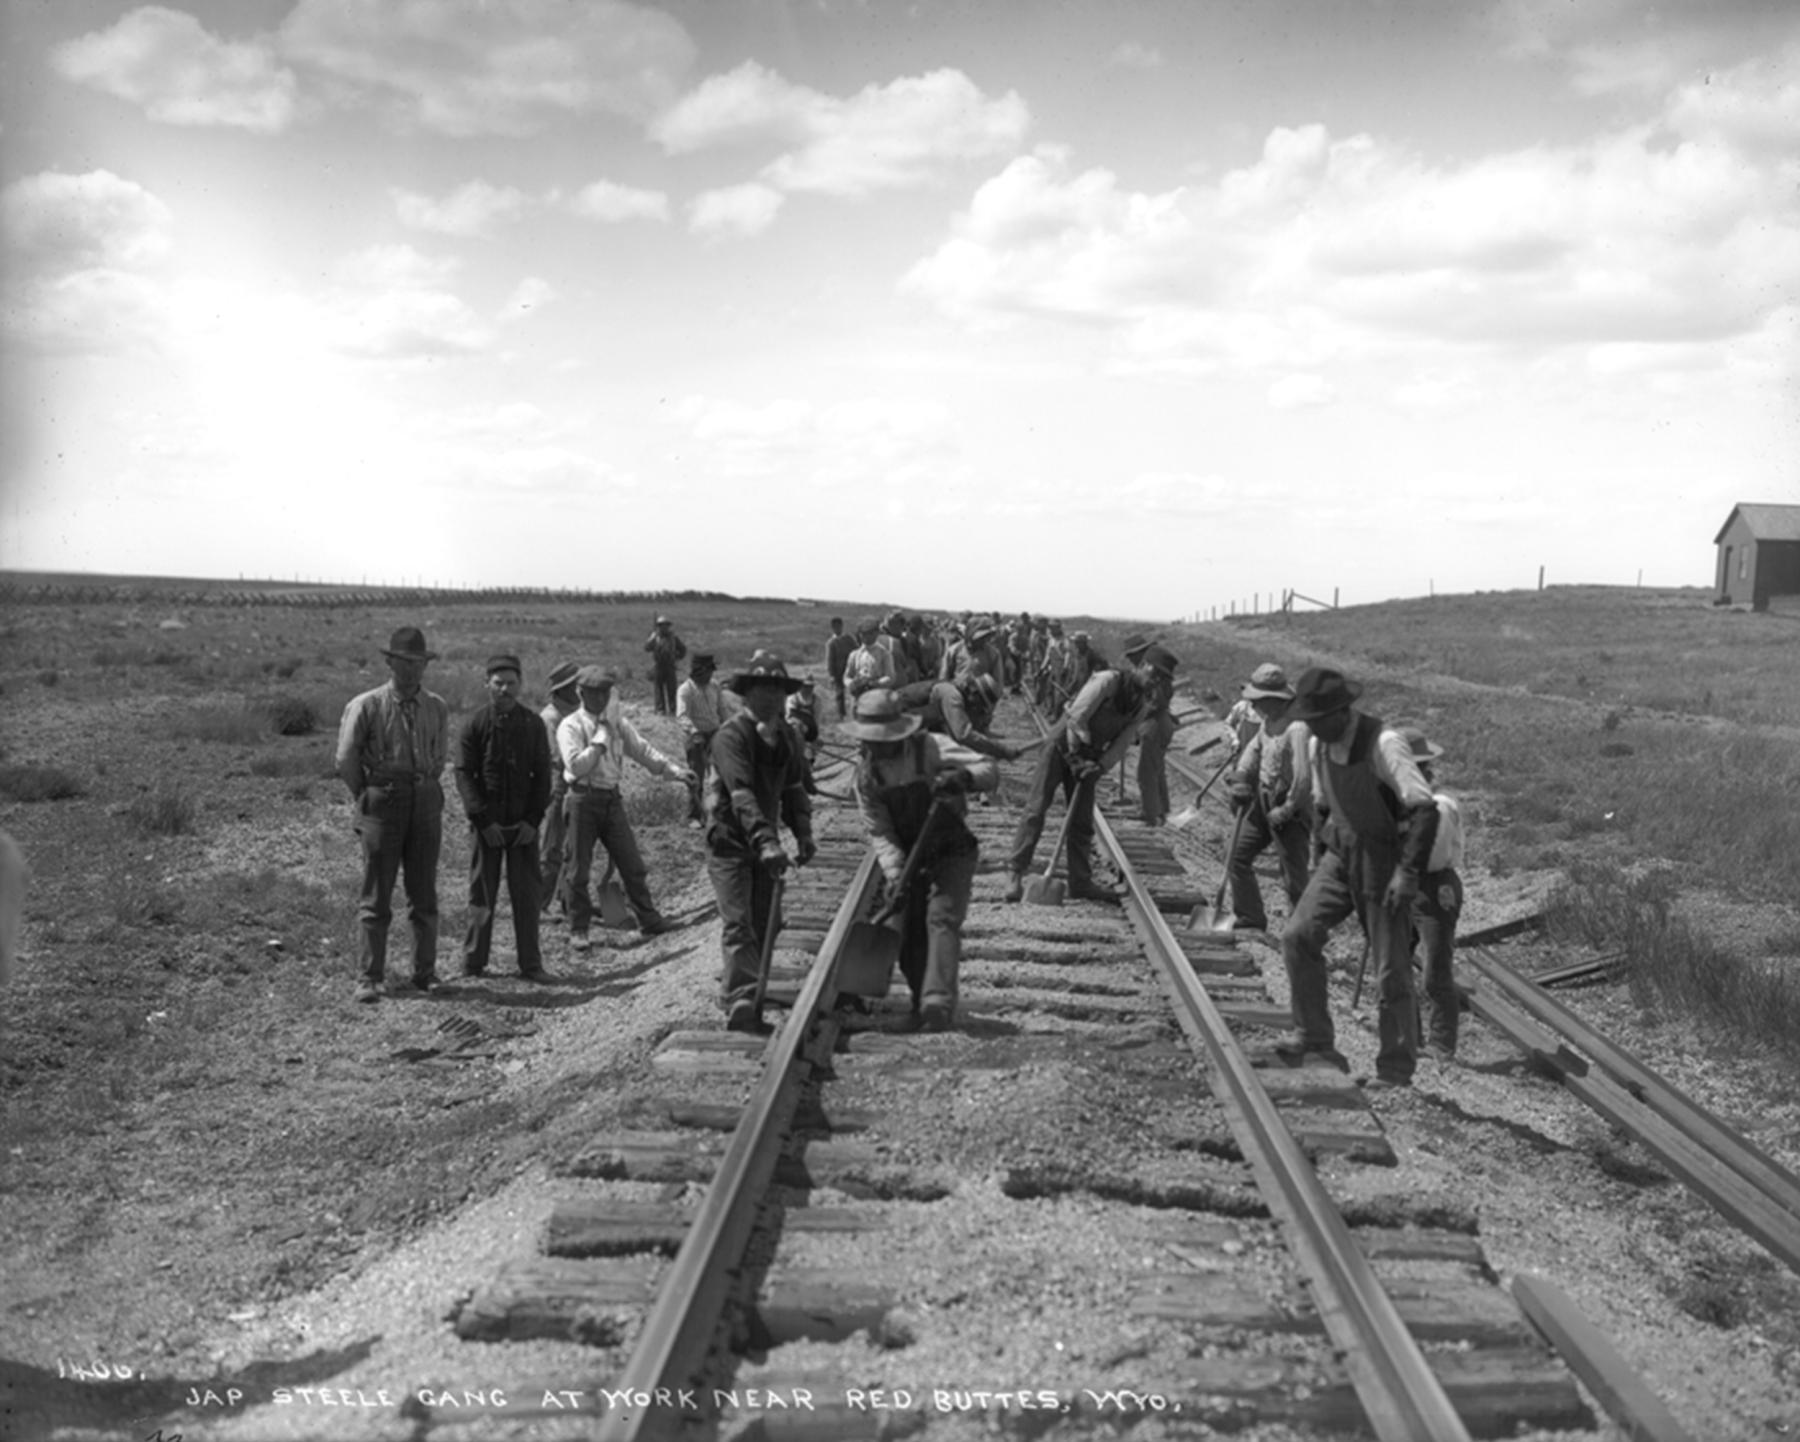 Japanese railroad workers began arriving in Wyoming at least as early as 1892, when the Oregon Short Line, a subsidiary of the Union Pacific, employed 40 Japanese on its line from Granger, Wyoming, to Oregon. Here, a gang of Japanese workers replaces rails on the Union Pacific at Red Buttes, south of Laramie, in 1906. Wyoming State Archives.